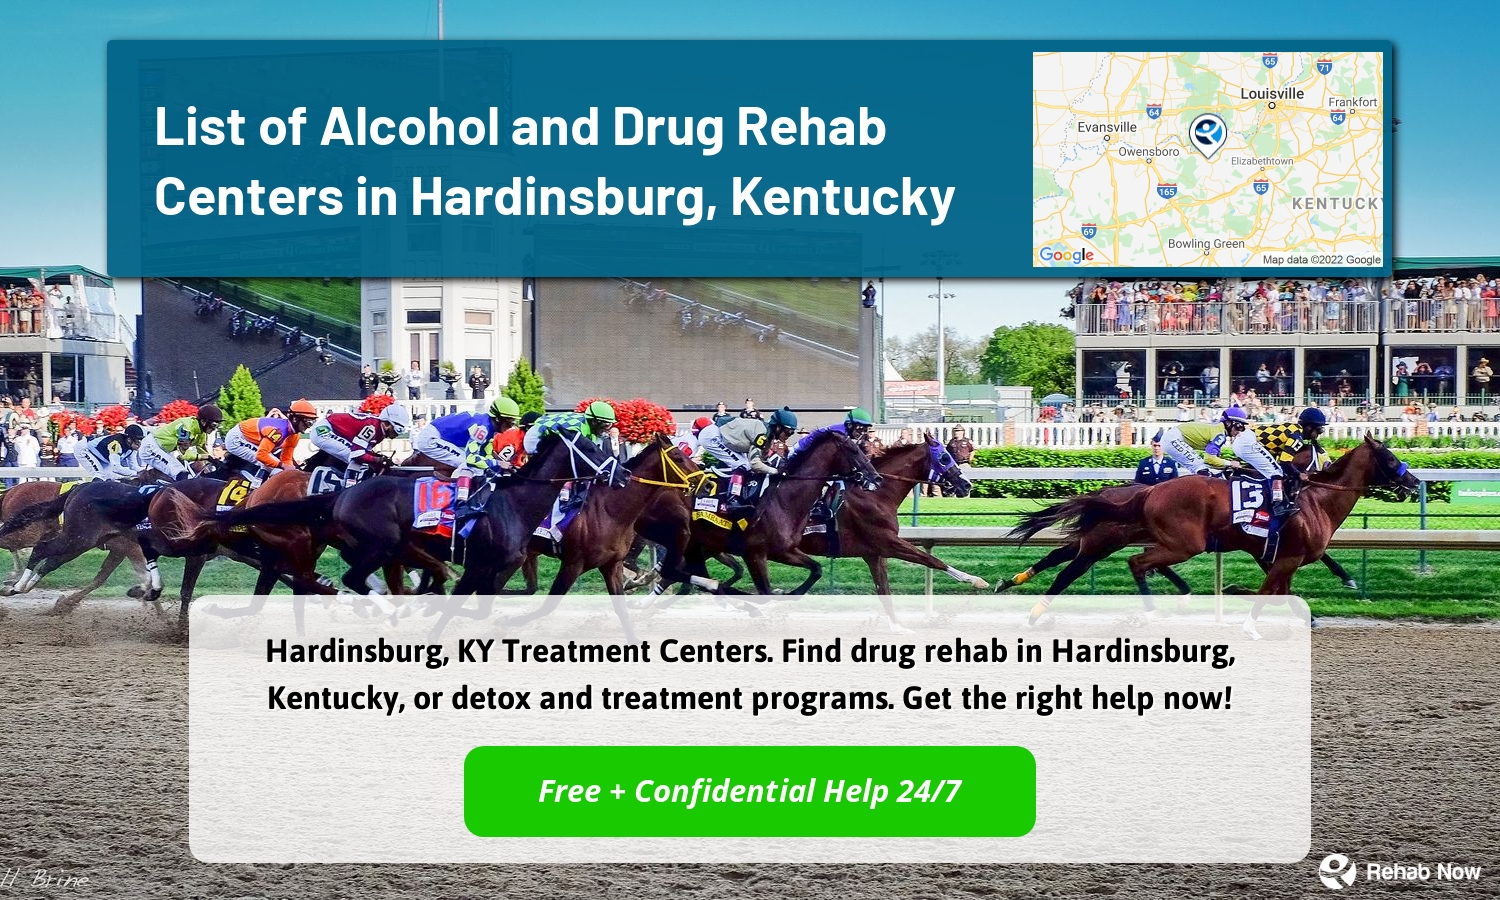 Hardinsburg, KY Treatment Centers. Find drug rehab in Hardinsburg, Kentucky, or detox and treatment programs. Get the right help now!